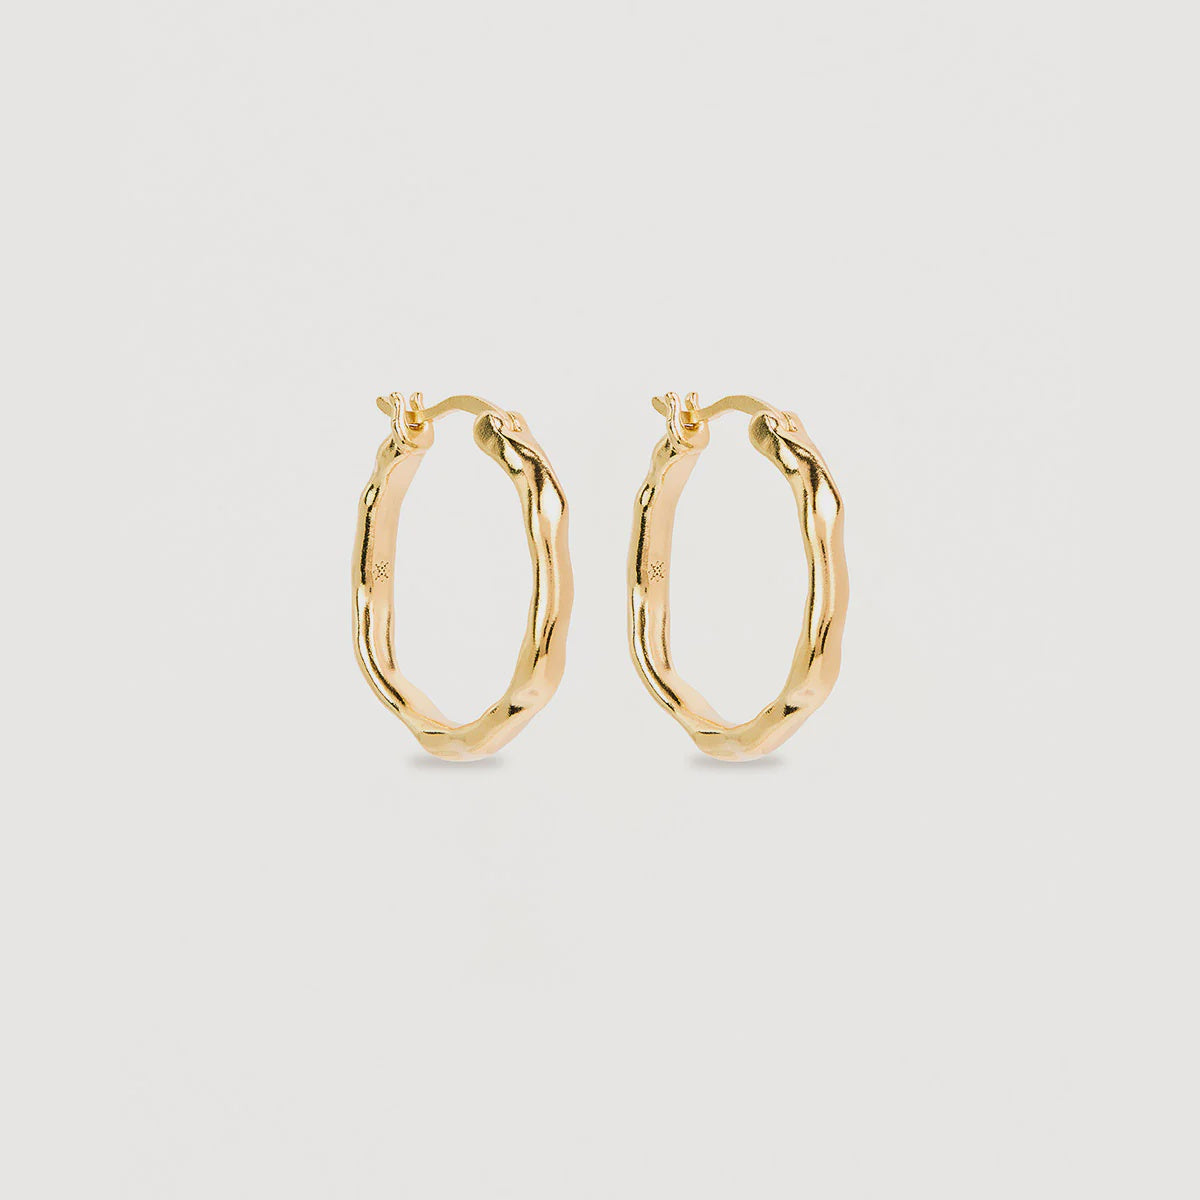 BY CHARLOTTE | LOVER HOOPS